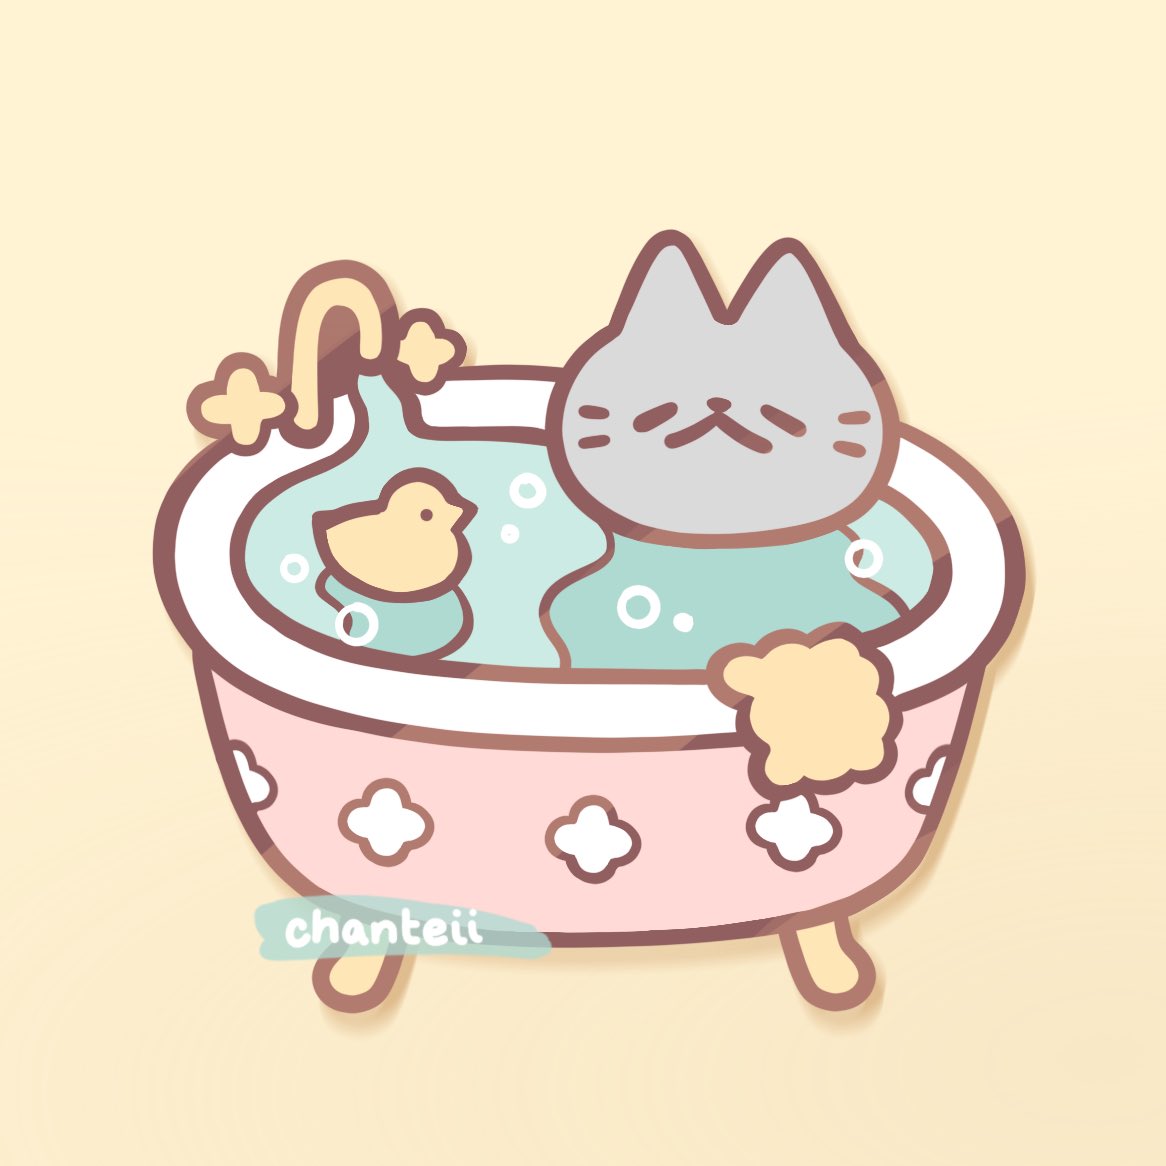 ? Bathroom collection
I have a new enamel pin collection for preorder today! 
https://t.co/bqFye5mYMO 